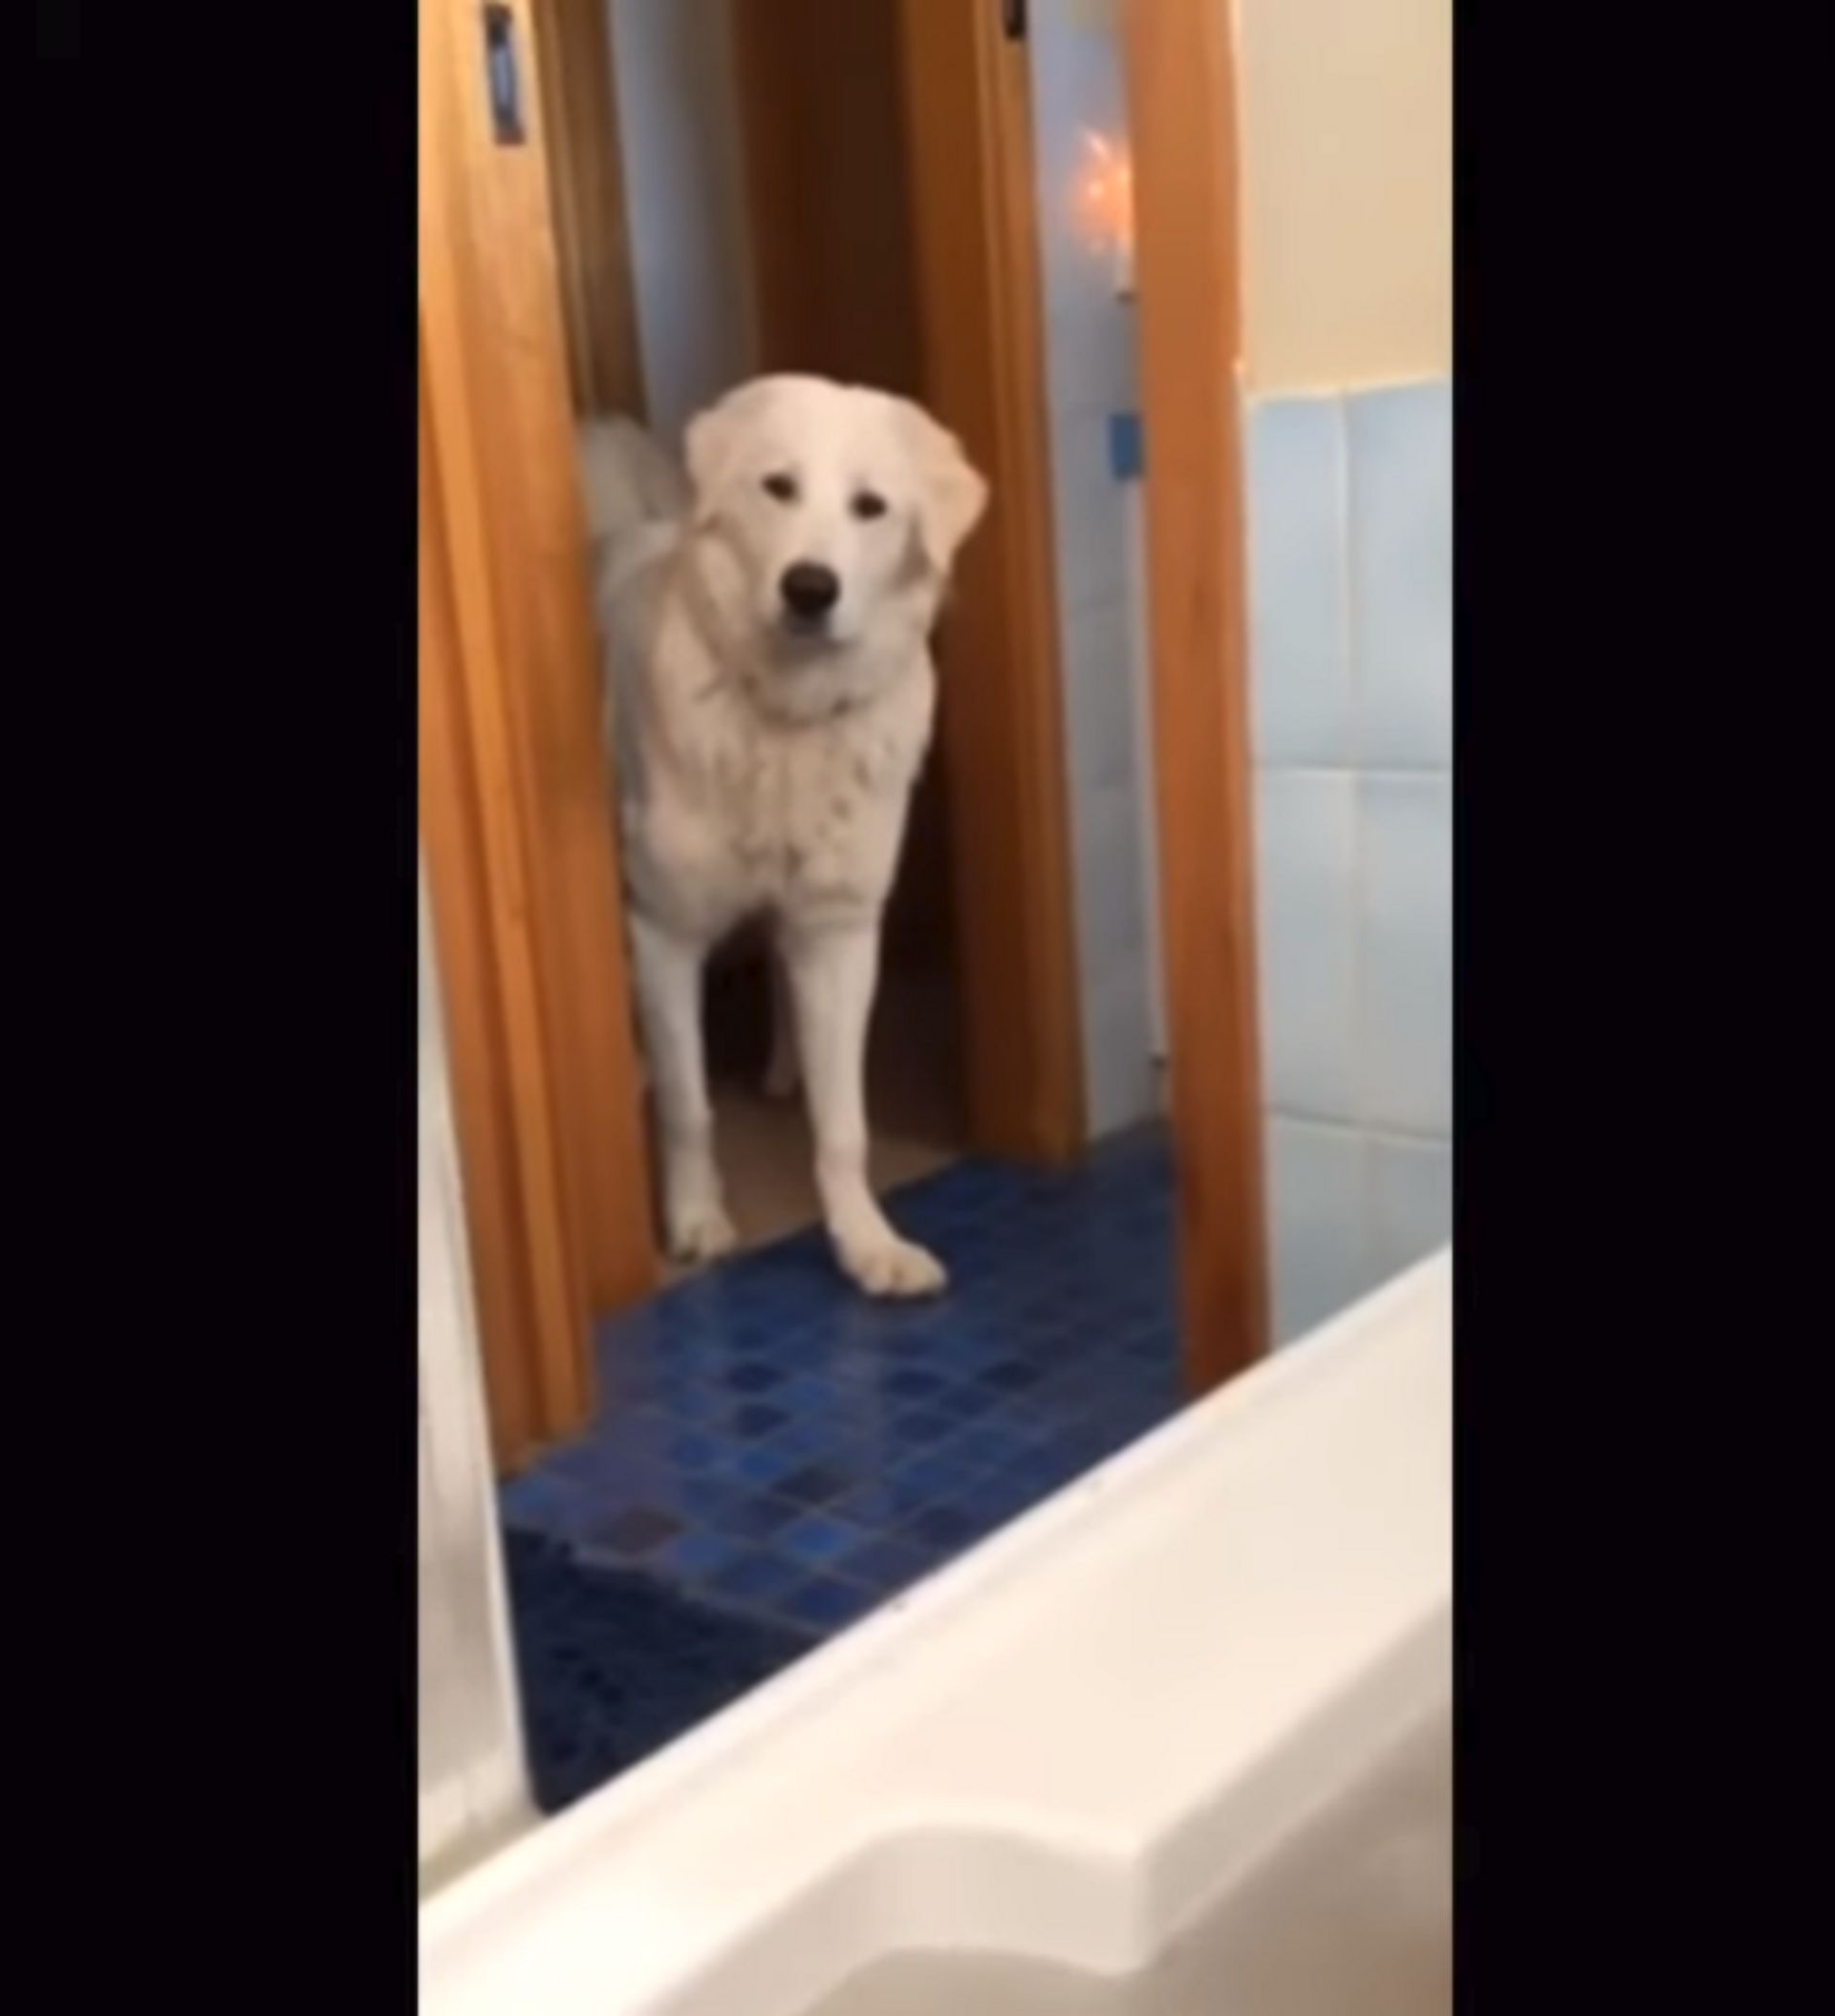 ‘It’s Not Happening!’: Dog Argues With Owner Over Drinking Bathwater ...